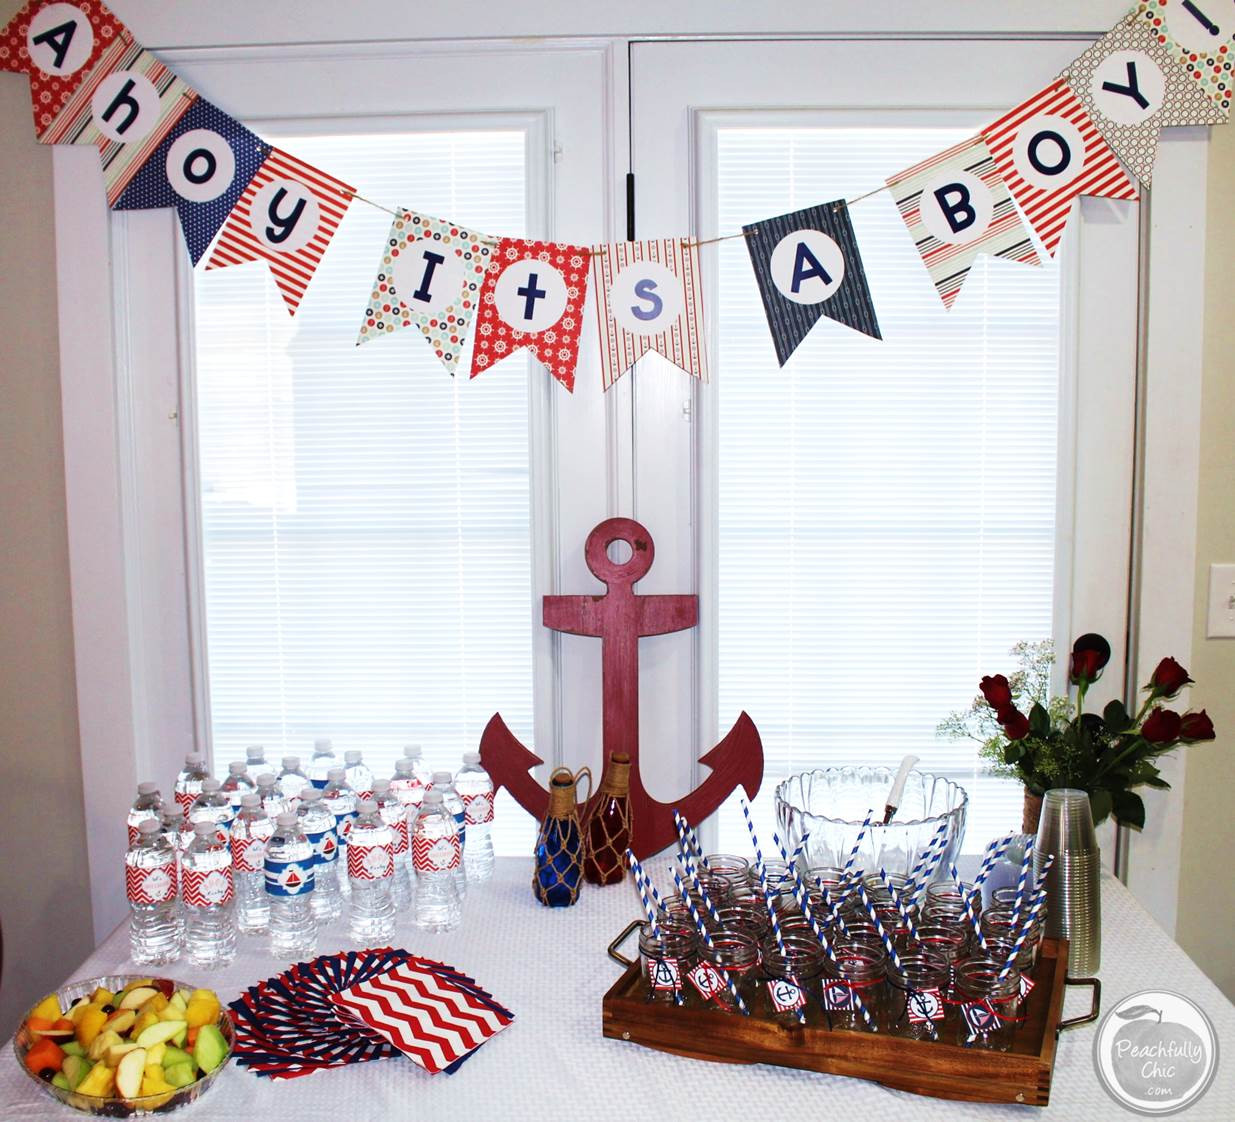 Nautical Baby Shower Gifts
 10 Ideas For A Nautical Themed Baby Shower – Ramshackle Glam